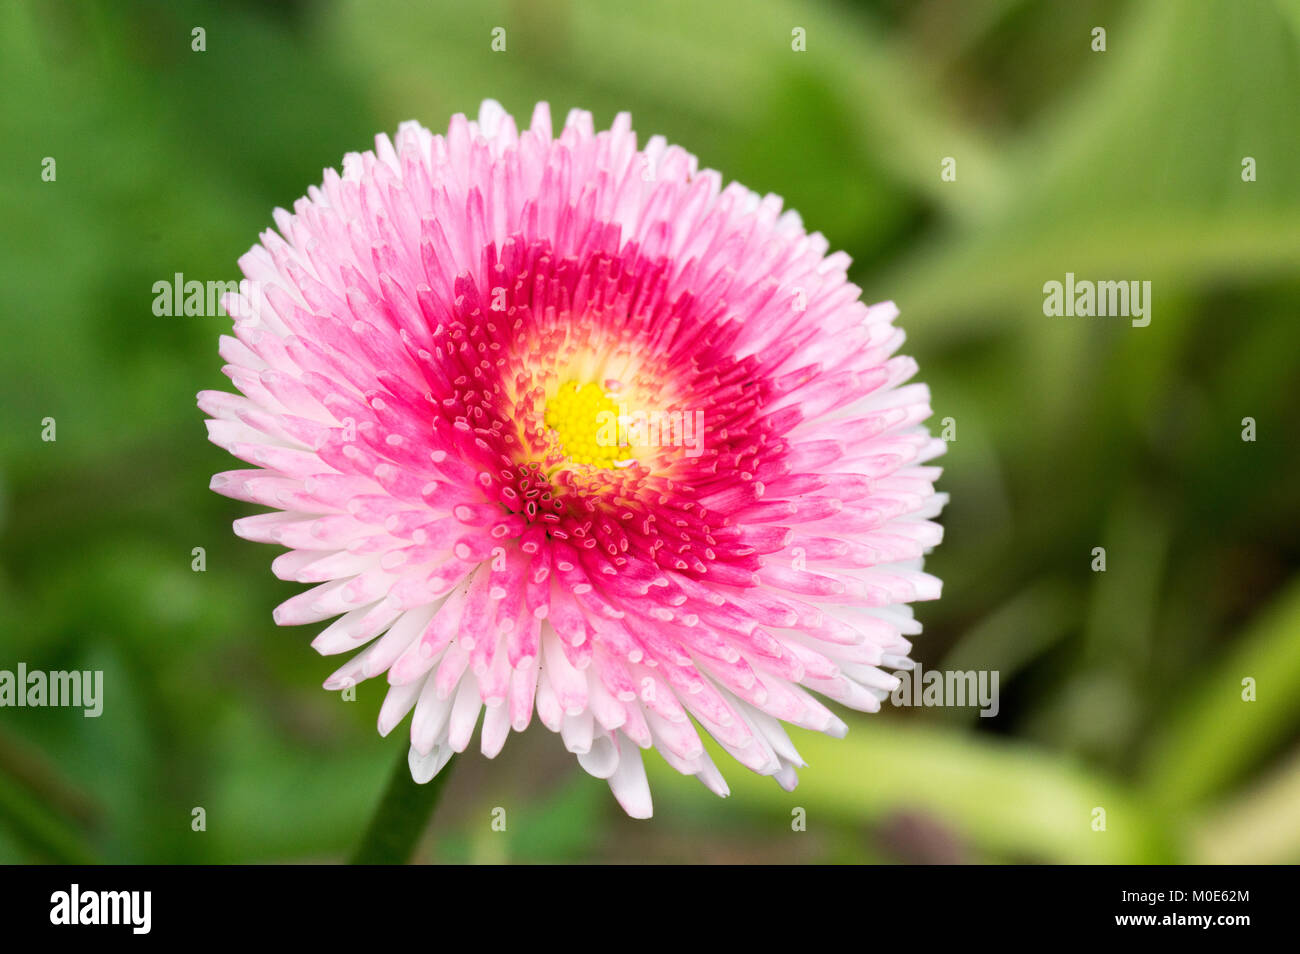 Red Pom Pom High Resolution Stock Photography and Images - Alamy